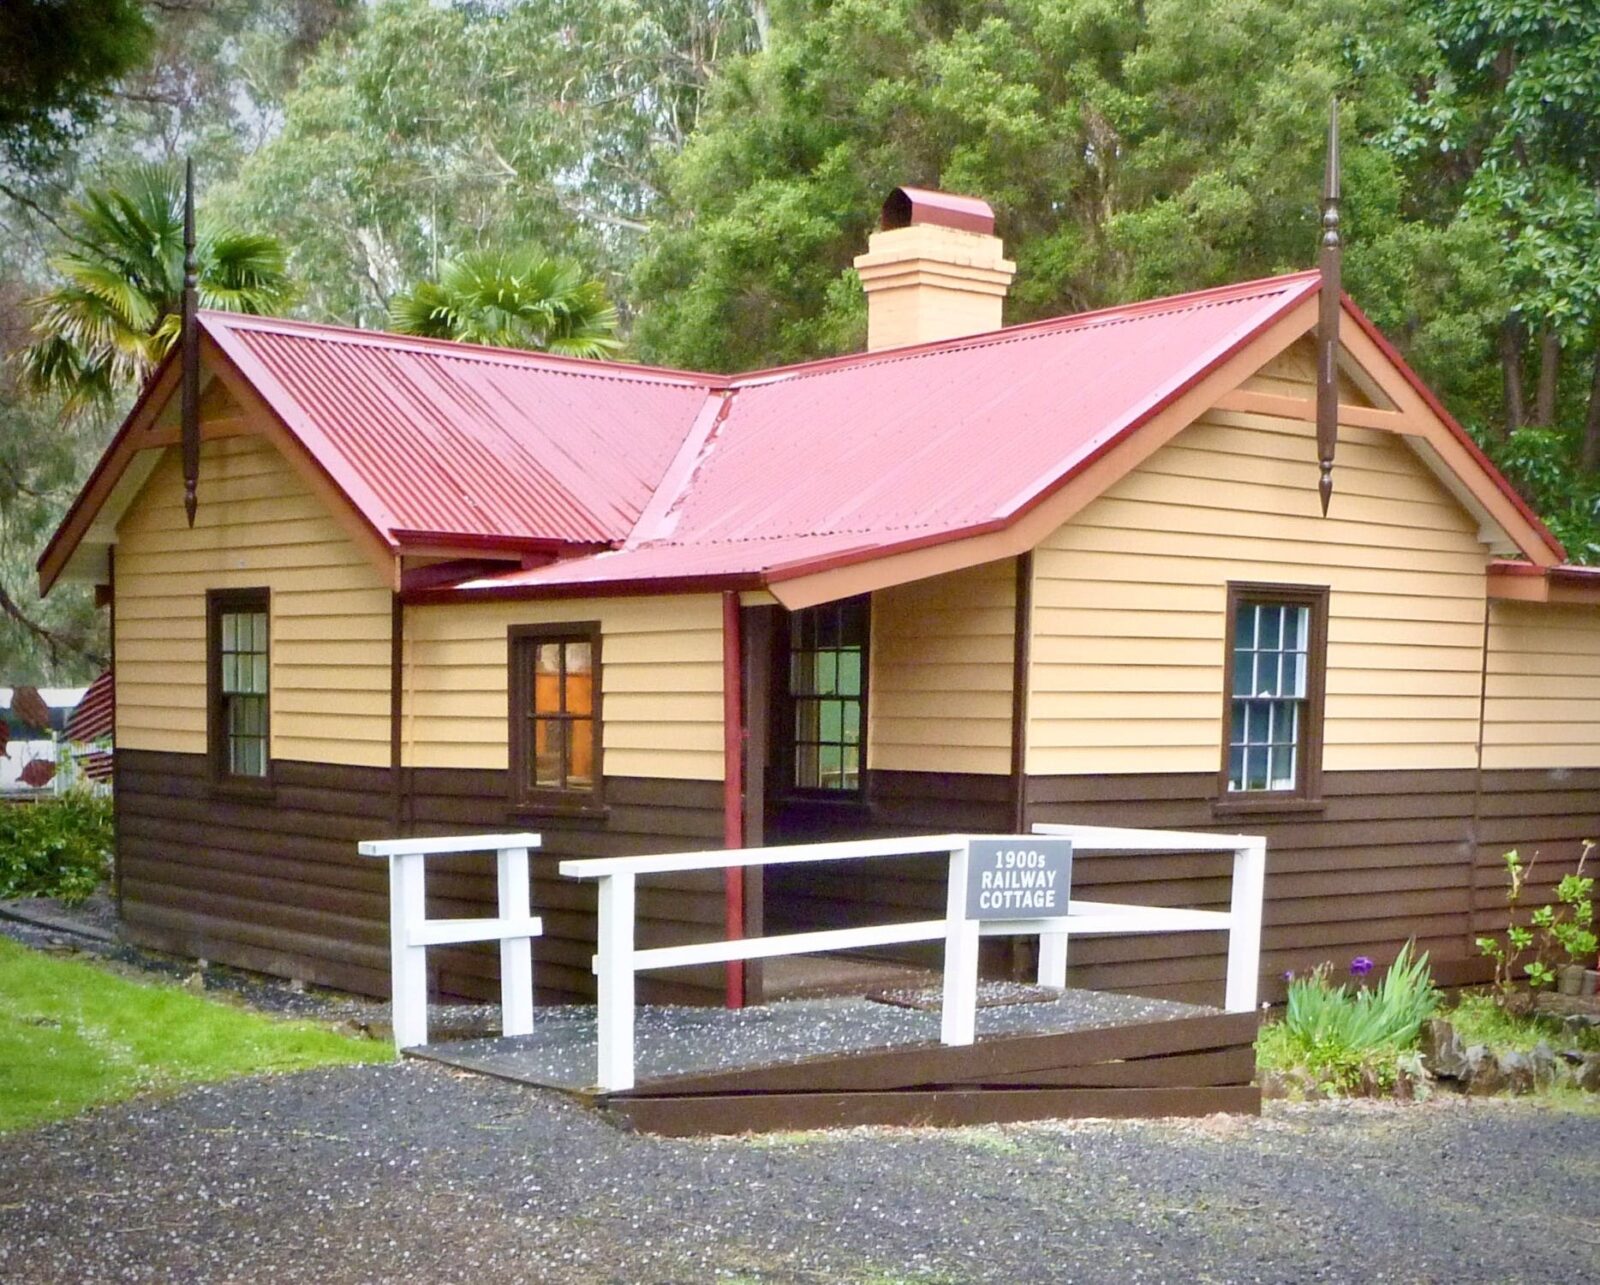 Exterior of Our restored & fully furnished 1900s Railway Cottage